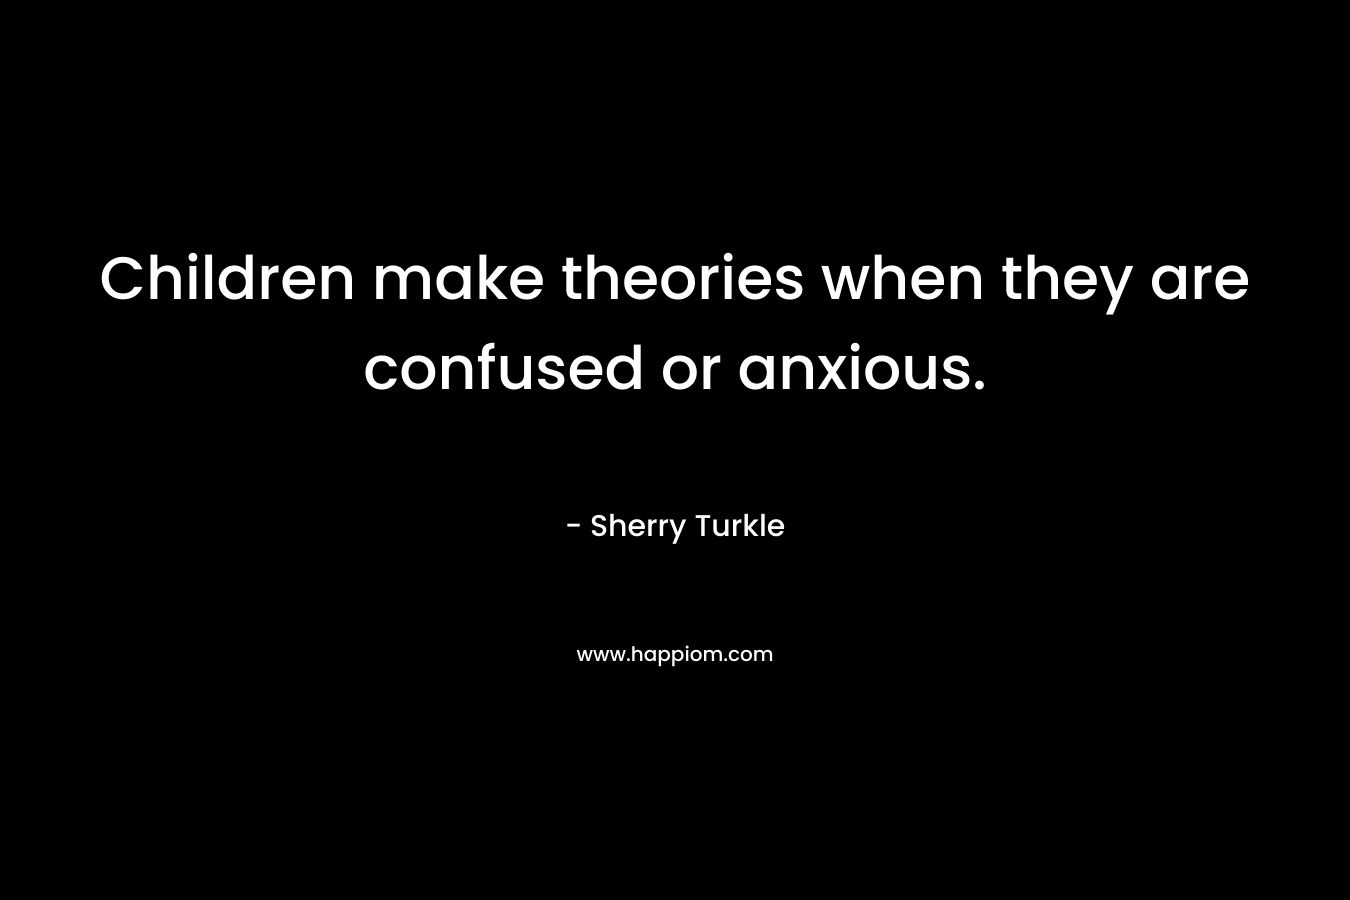 Children make theories when they are confused or anxious.